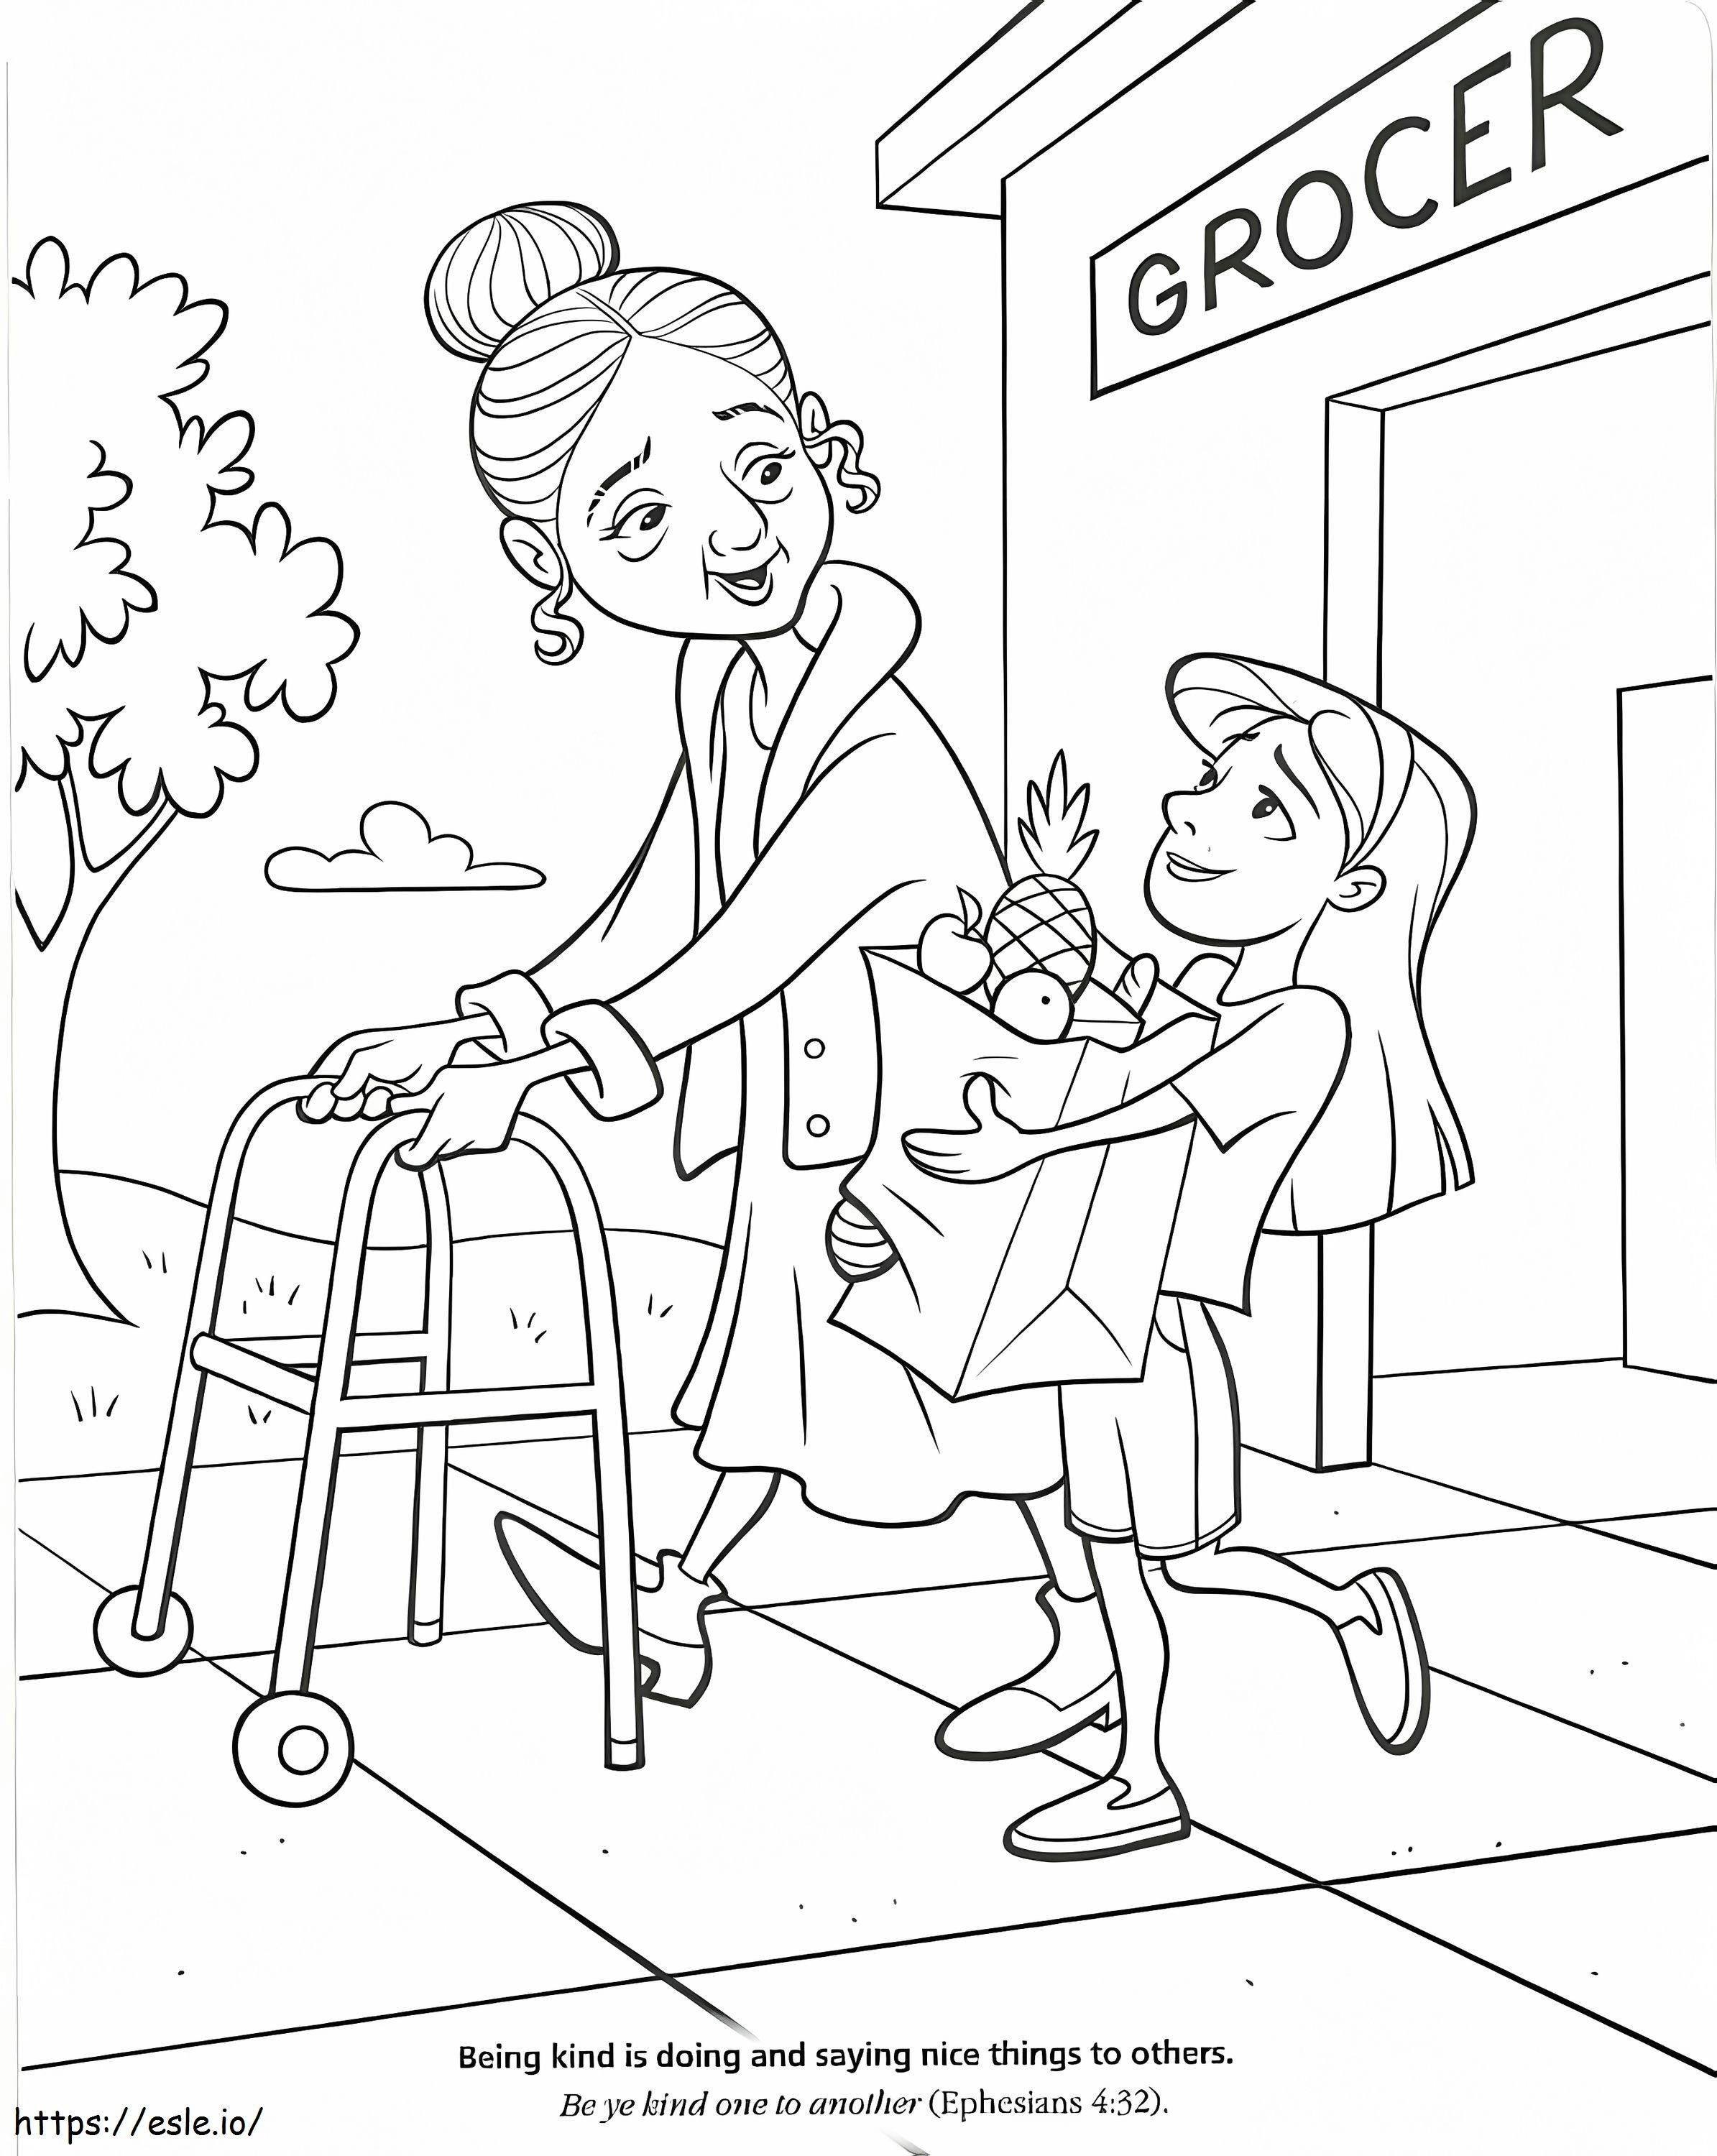 Being Kind coloring page